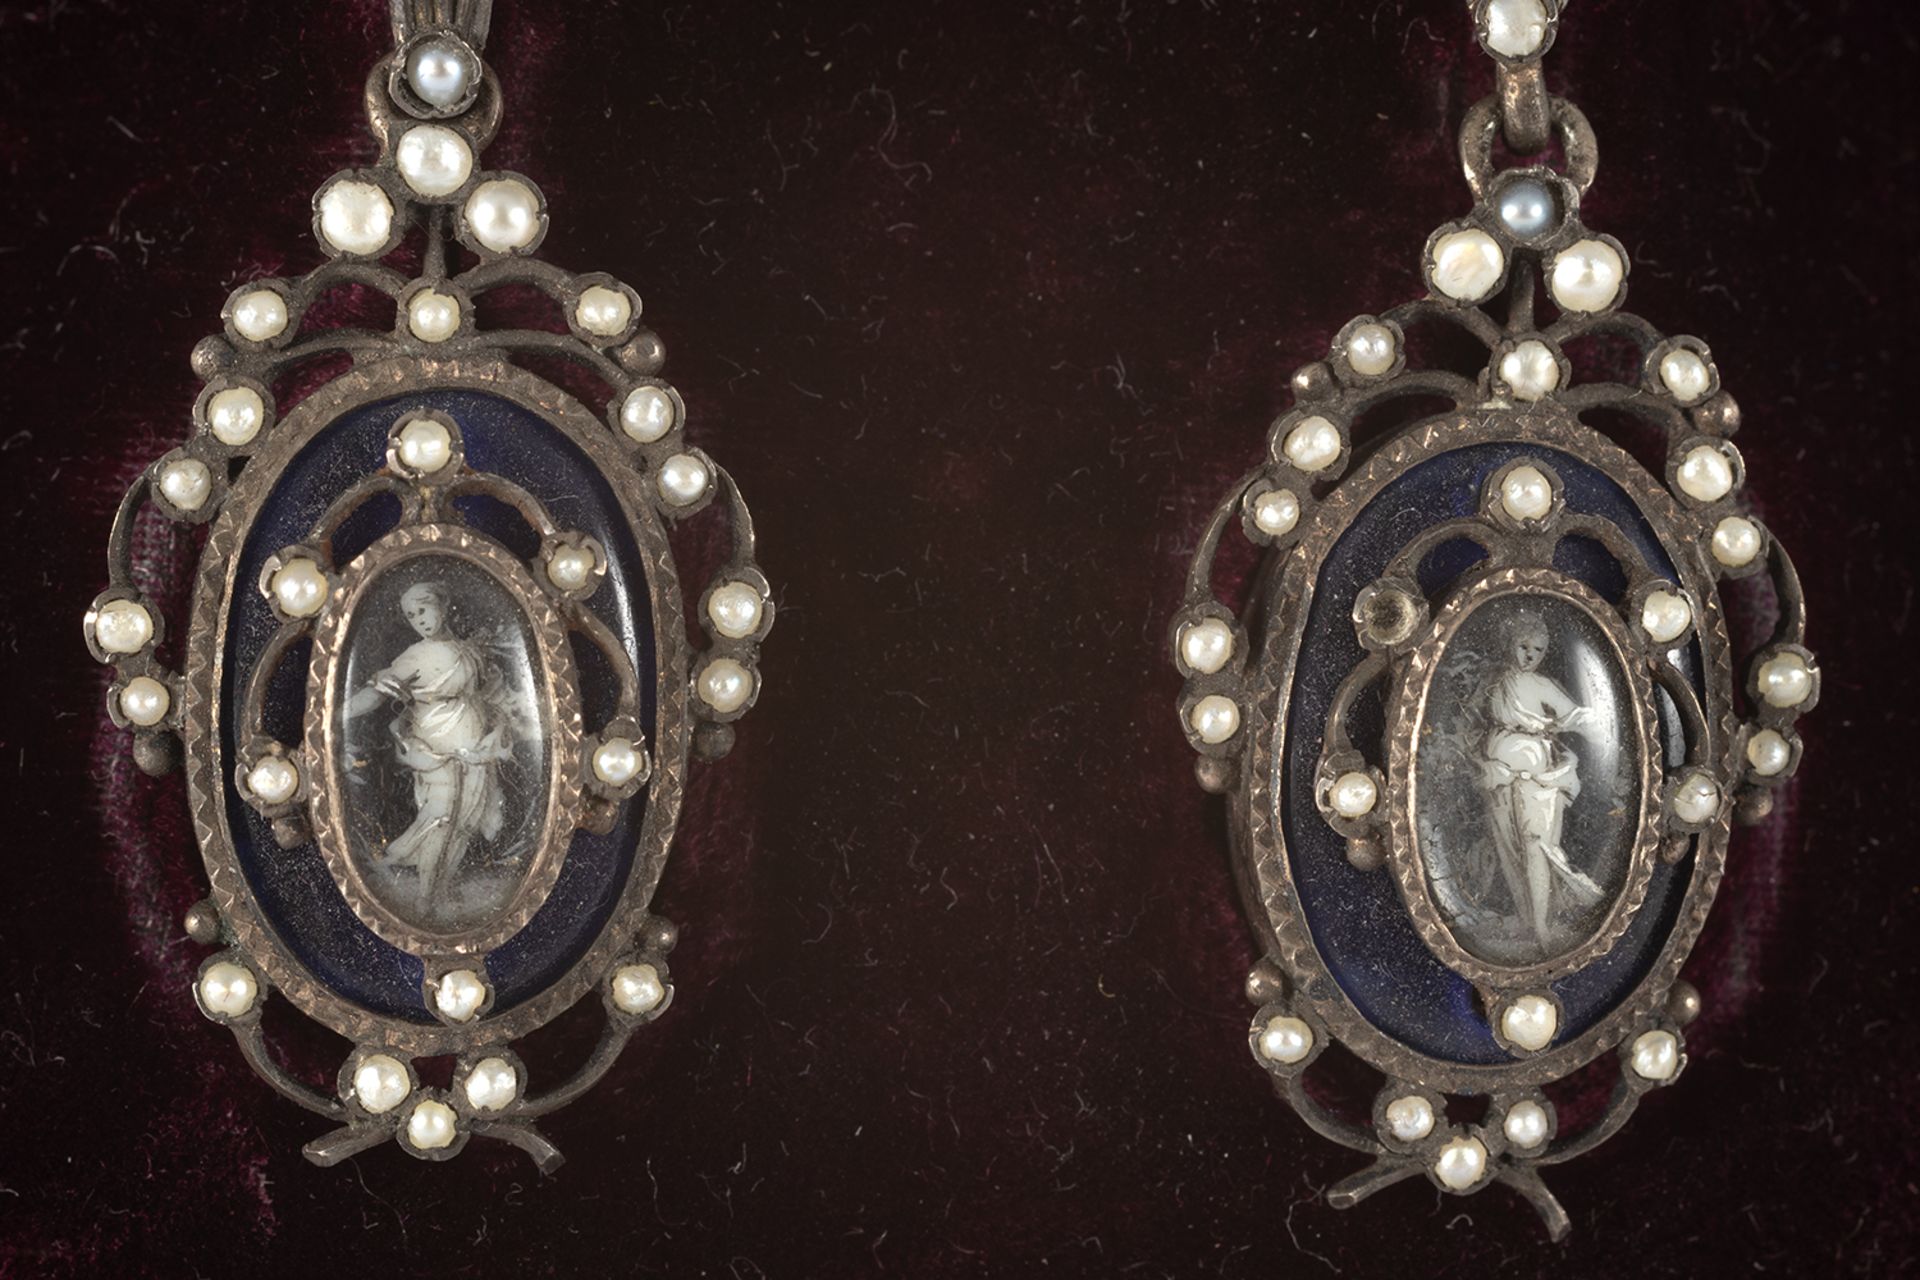 Set consisting of an Elizabethan brooch-pendant in silver, enamel and pearls with a representation o - Image 4 of 6